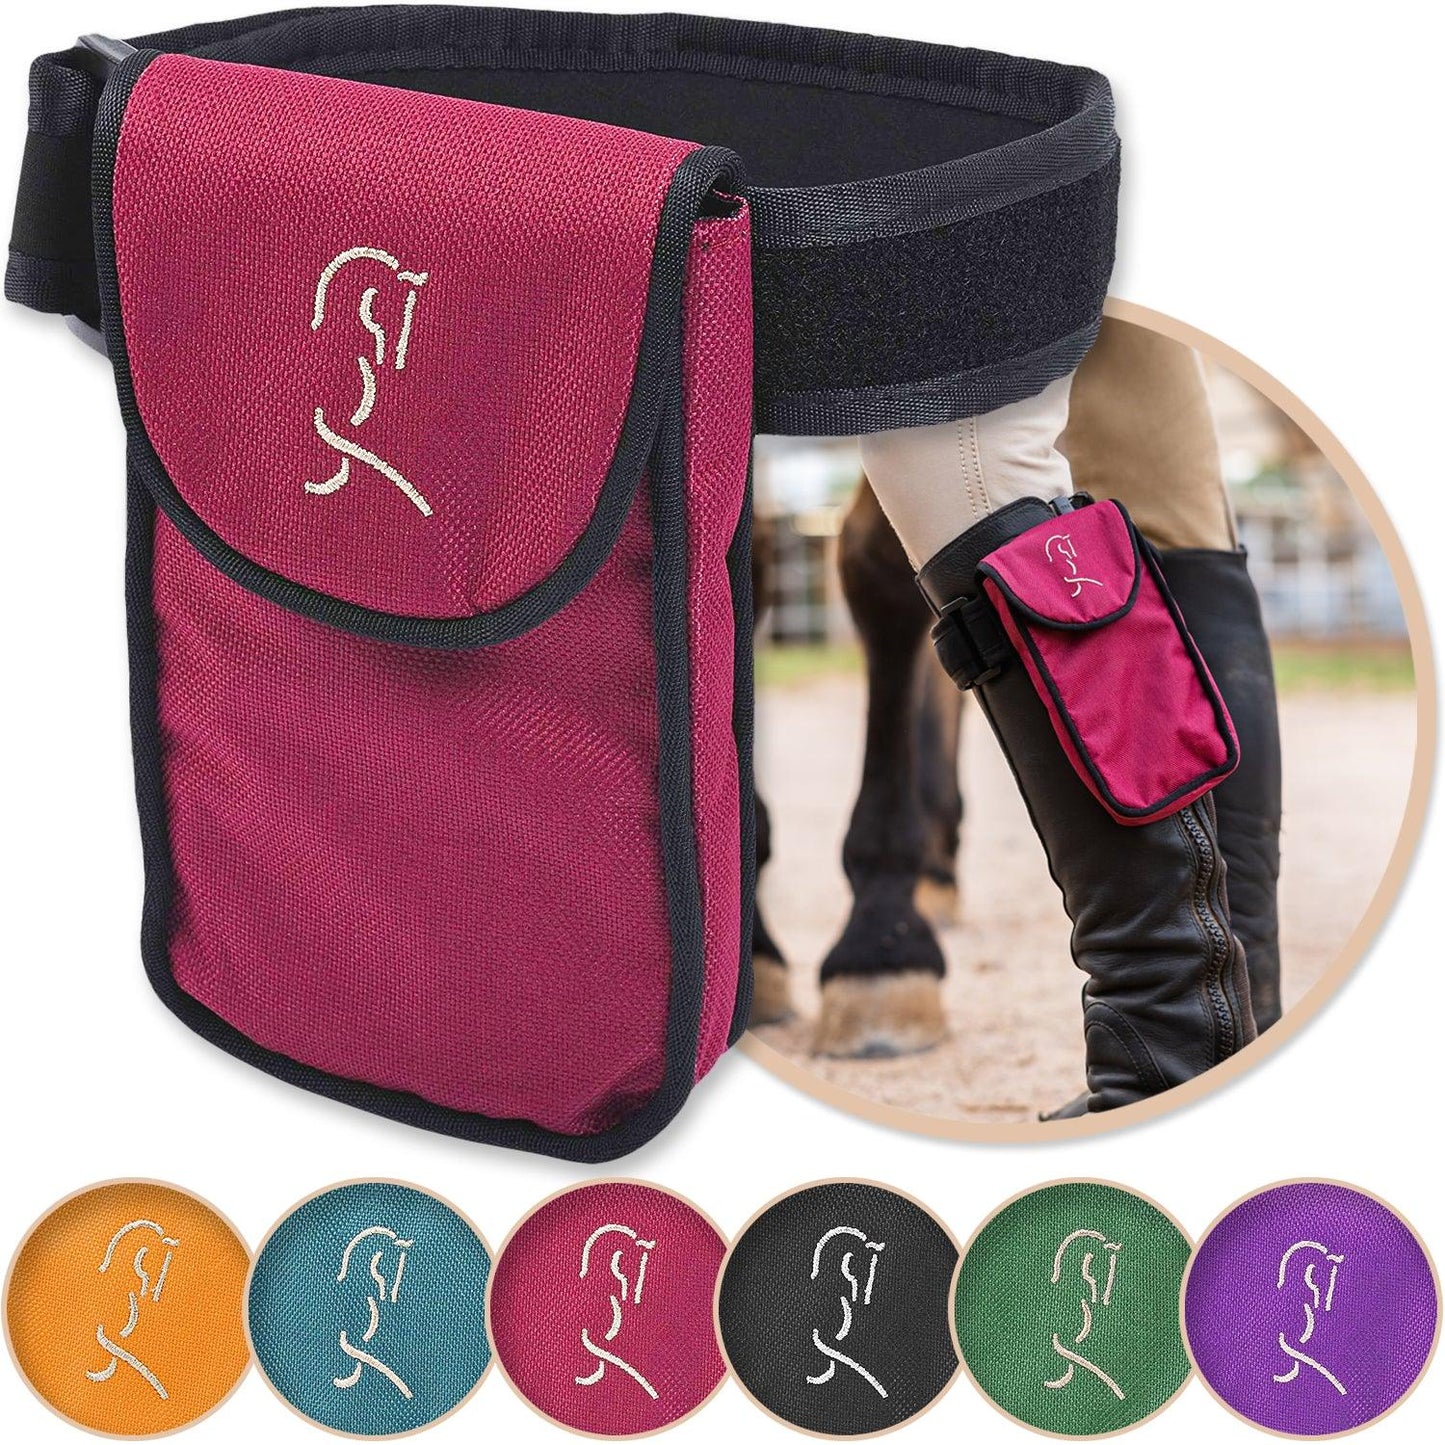 Burgundy equestrian cell phone holder shown with a variety of colors